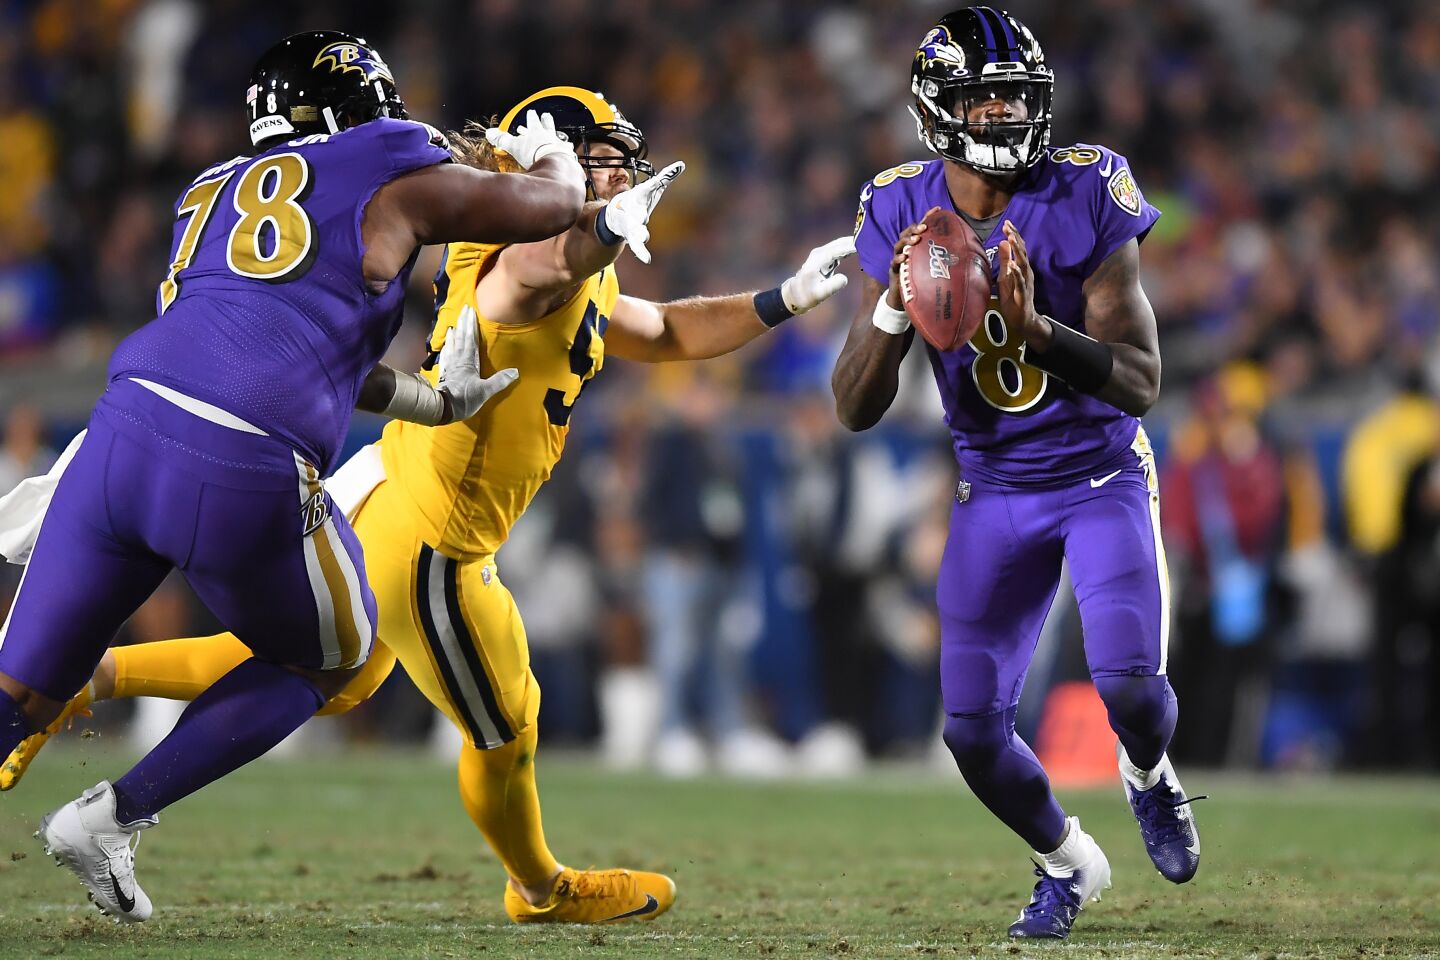 Ravens quarterback Lamar Jackson looks to throw under pressure from Rams linebacker Clay Matthews during the second quarter of a game Nov. 25 at the Coliseum.